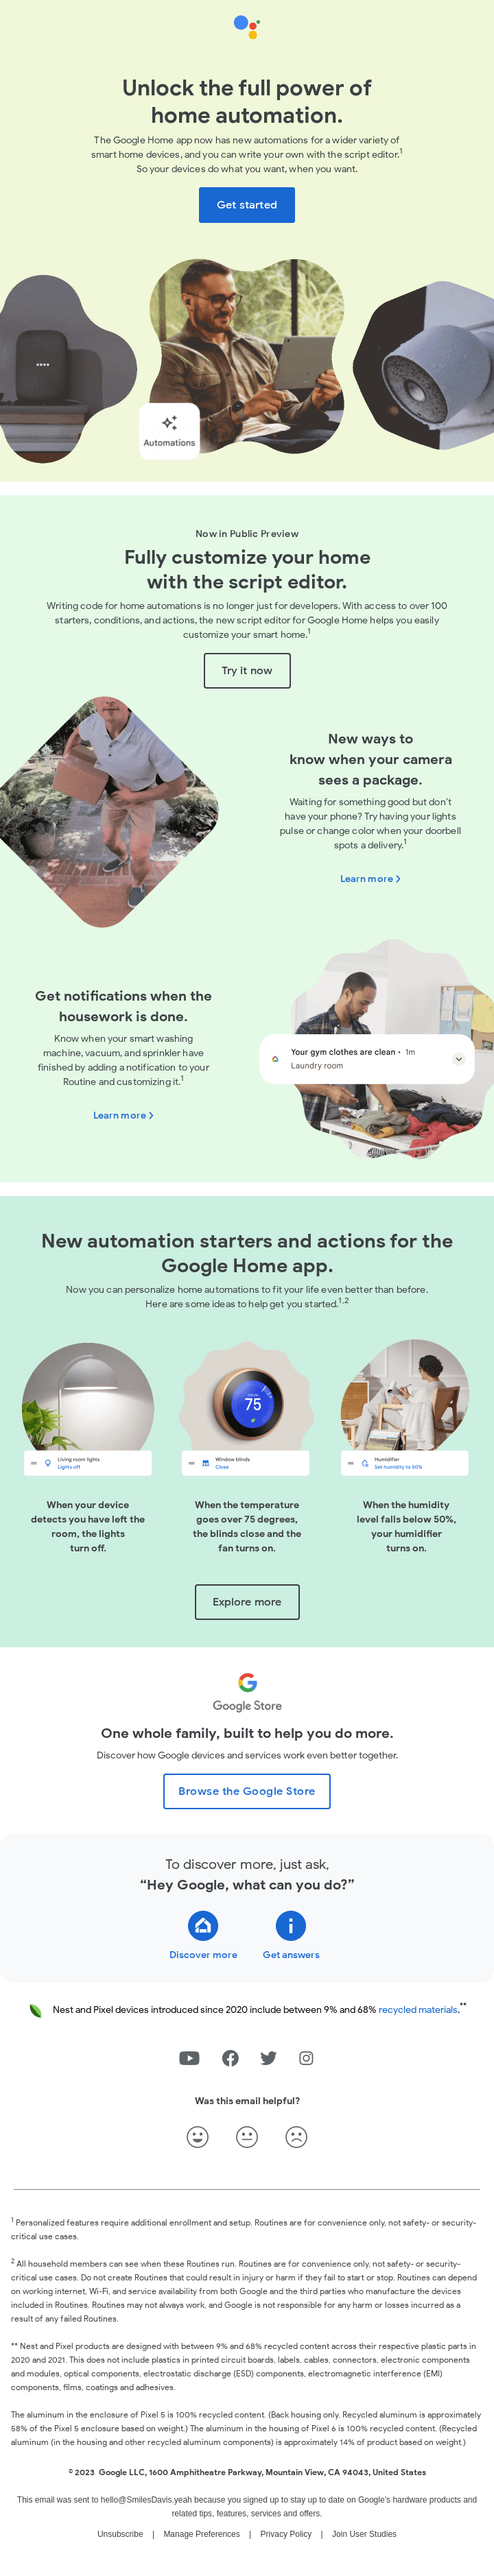 Enjoy more help around the house with new automations